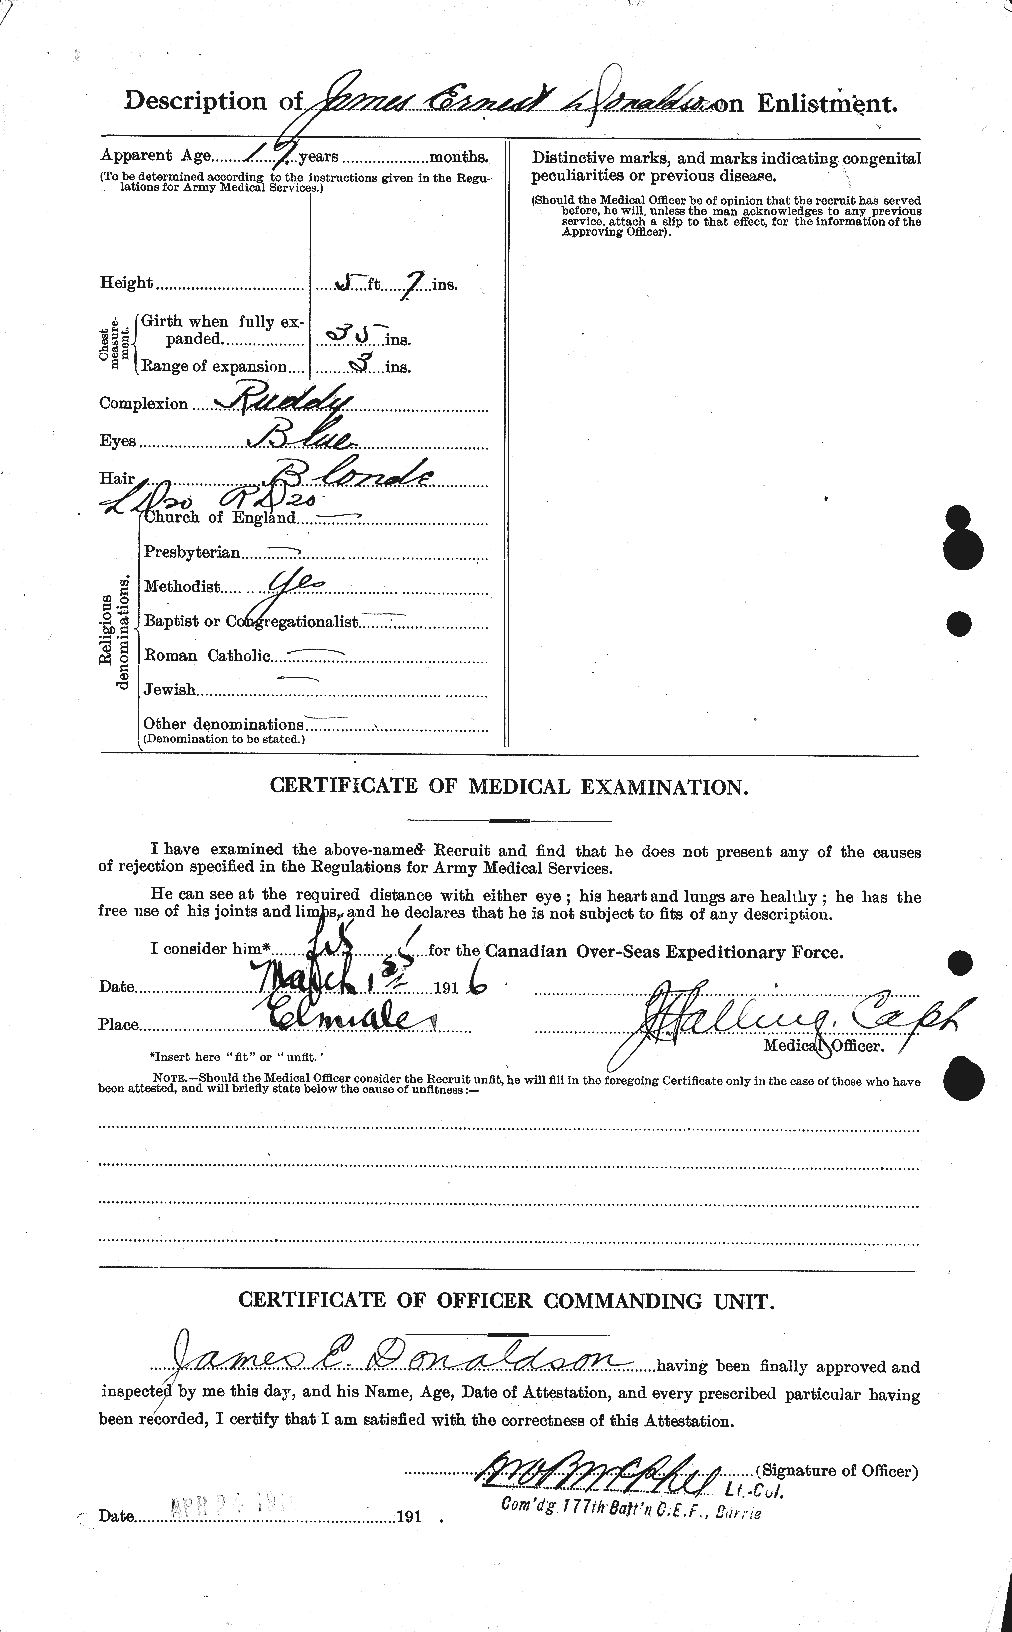 Personnel Records of the First World War - CEF 295962b